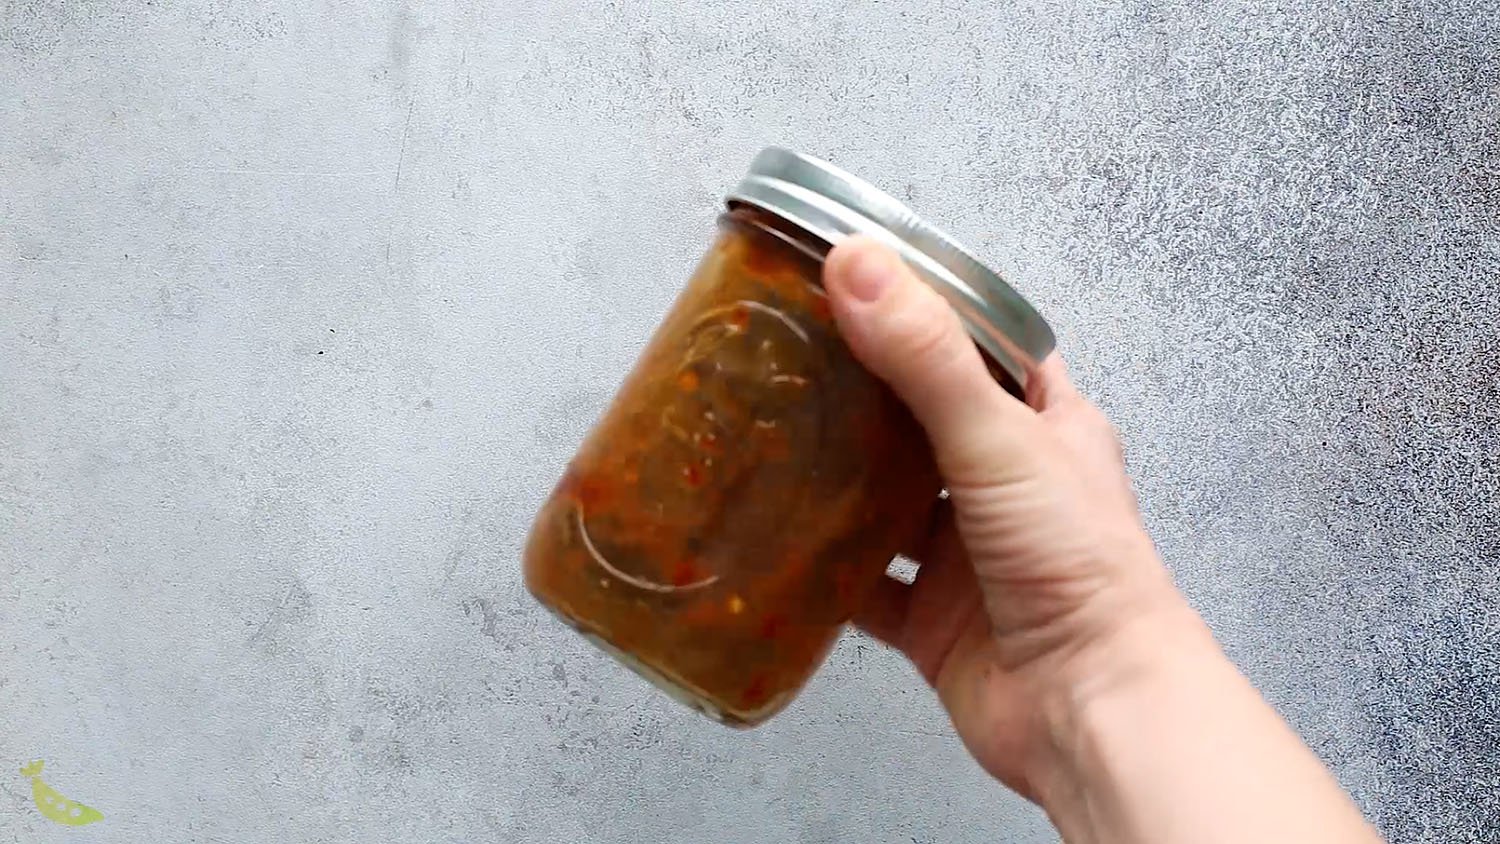 shaking up the sweet chili stir fry sauce in a jar